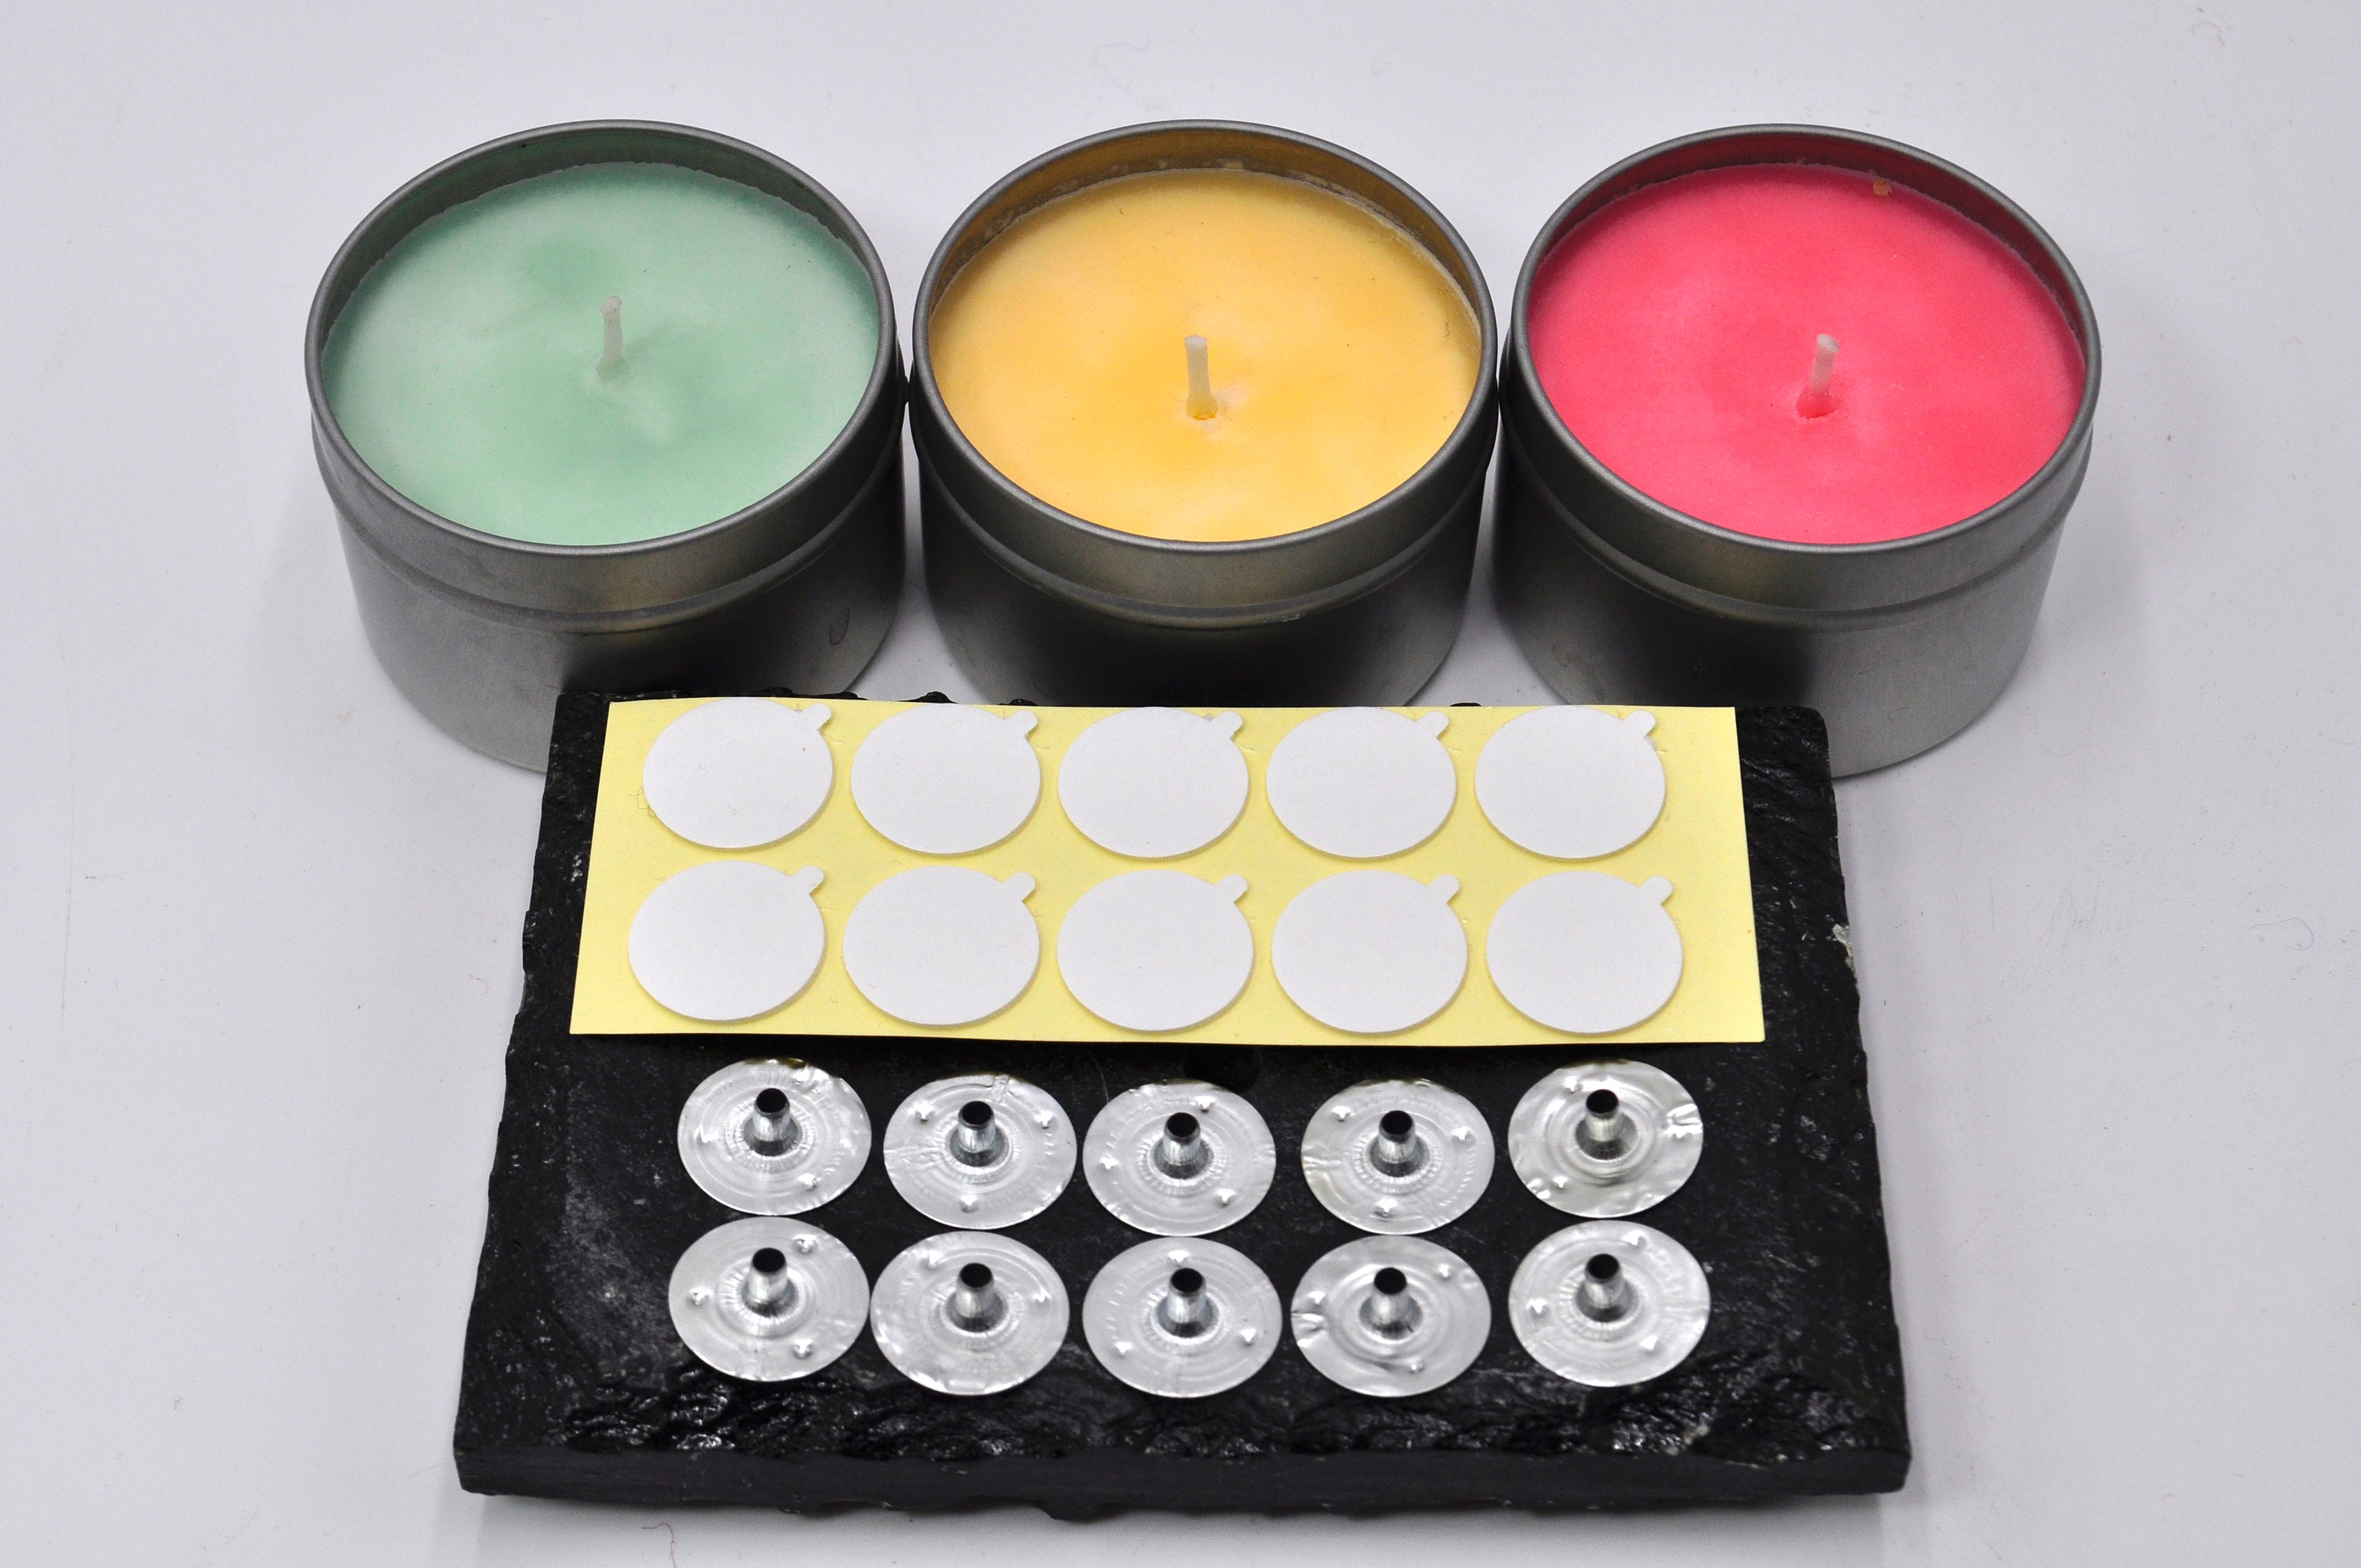 Include: Cotton Candle Wick wicks Coated With Paraffin Wax - Temu